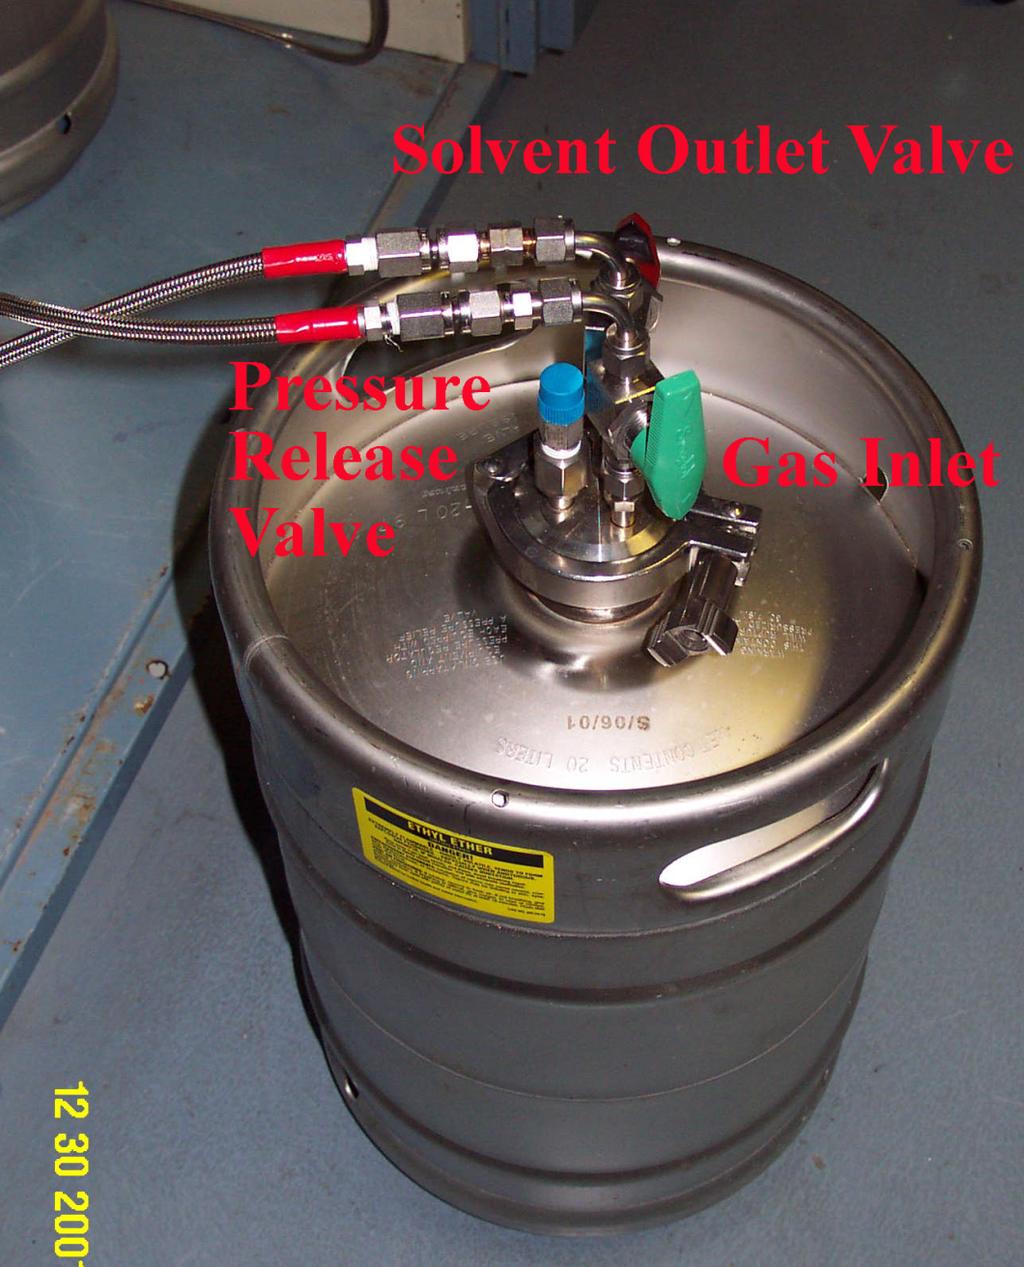 III. Solvent Kegs Each keg s main rgon inlet is green and solvent delivery outlet is color coded as to which solvent it corresponds.